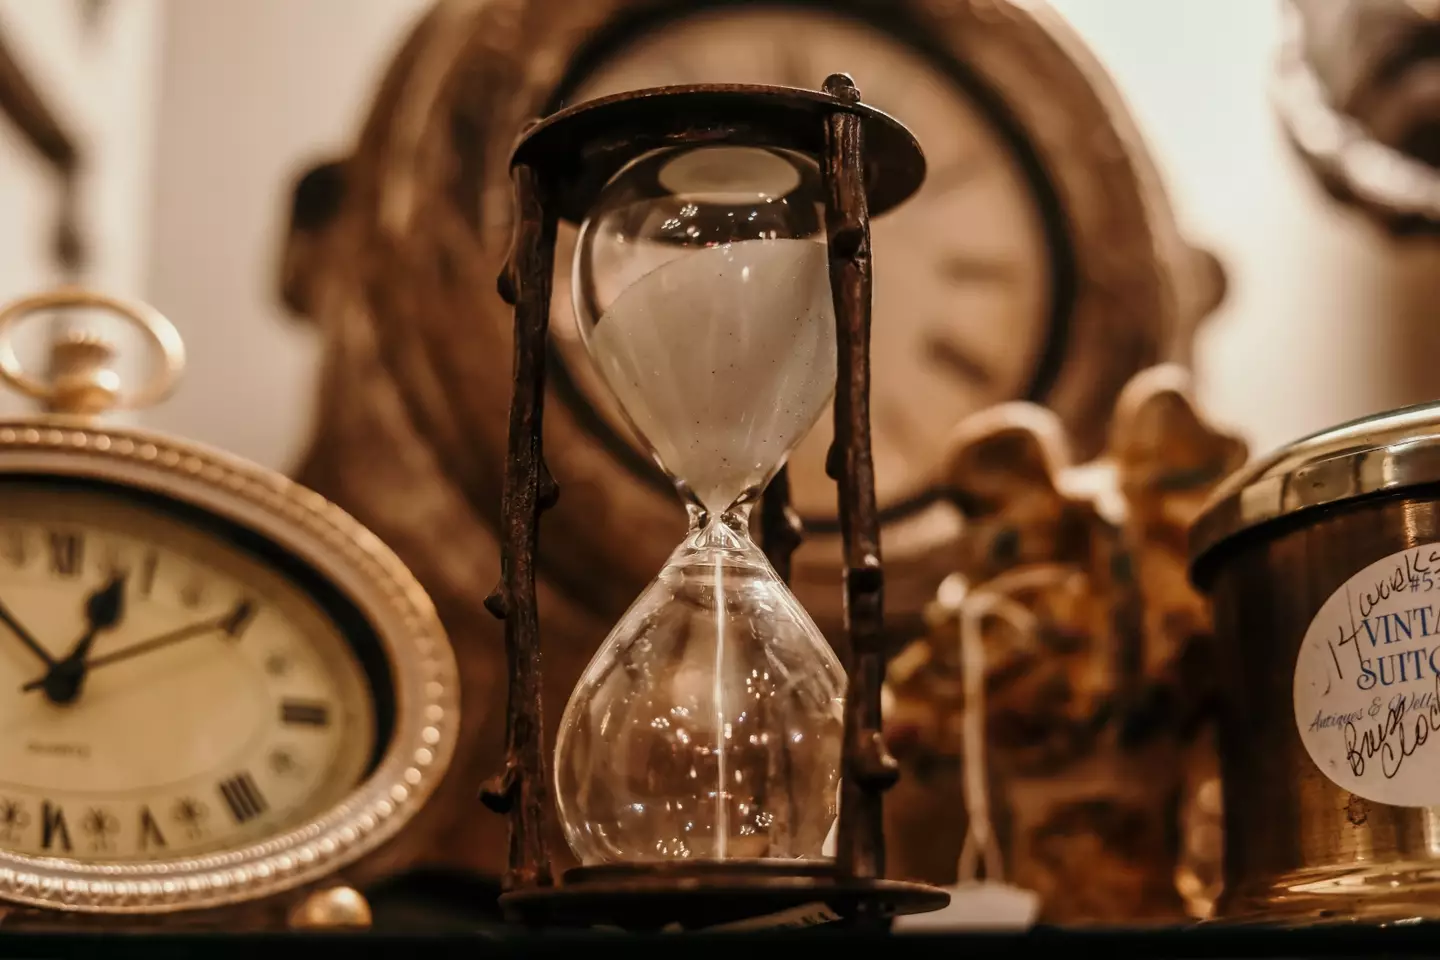 Time is rapidly speeding up, according to a new study.